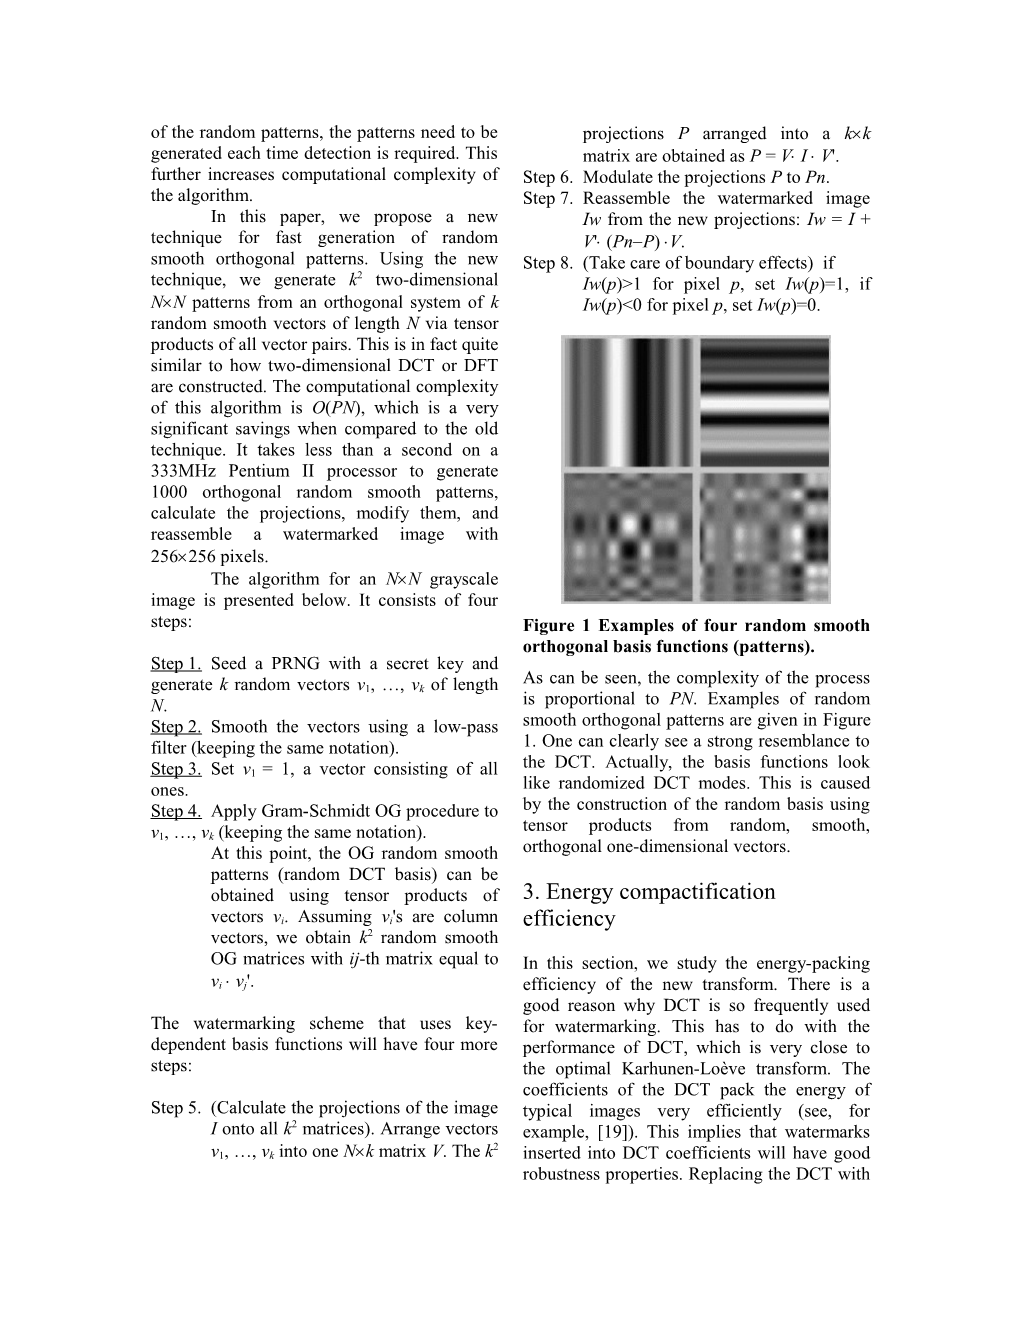 Title: Key-Dependent Random Image Transforms and Their Applications in Image Watermarking